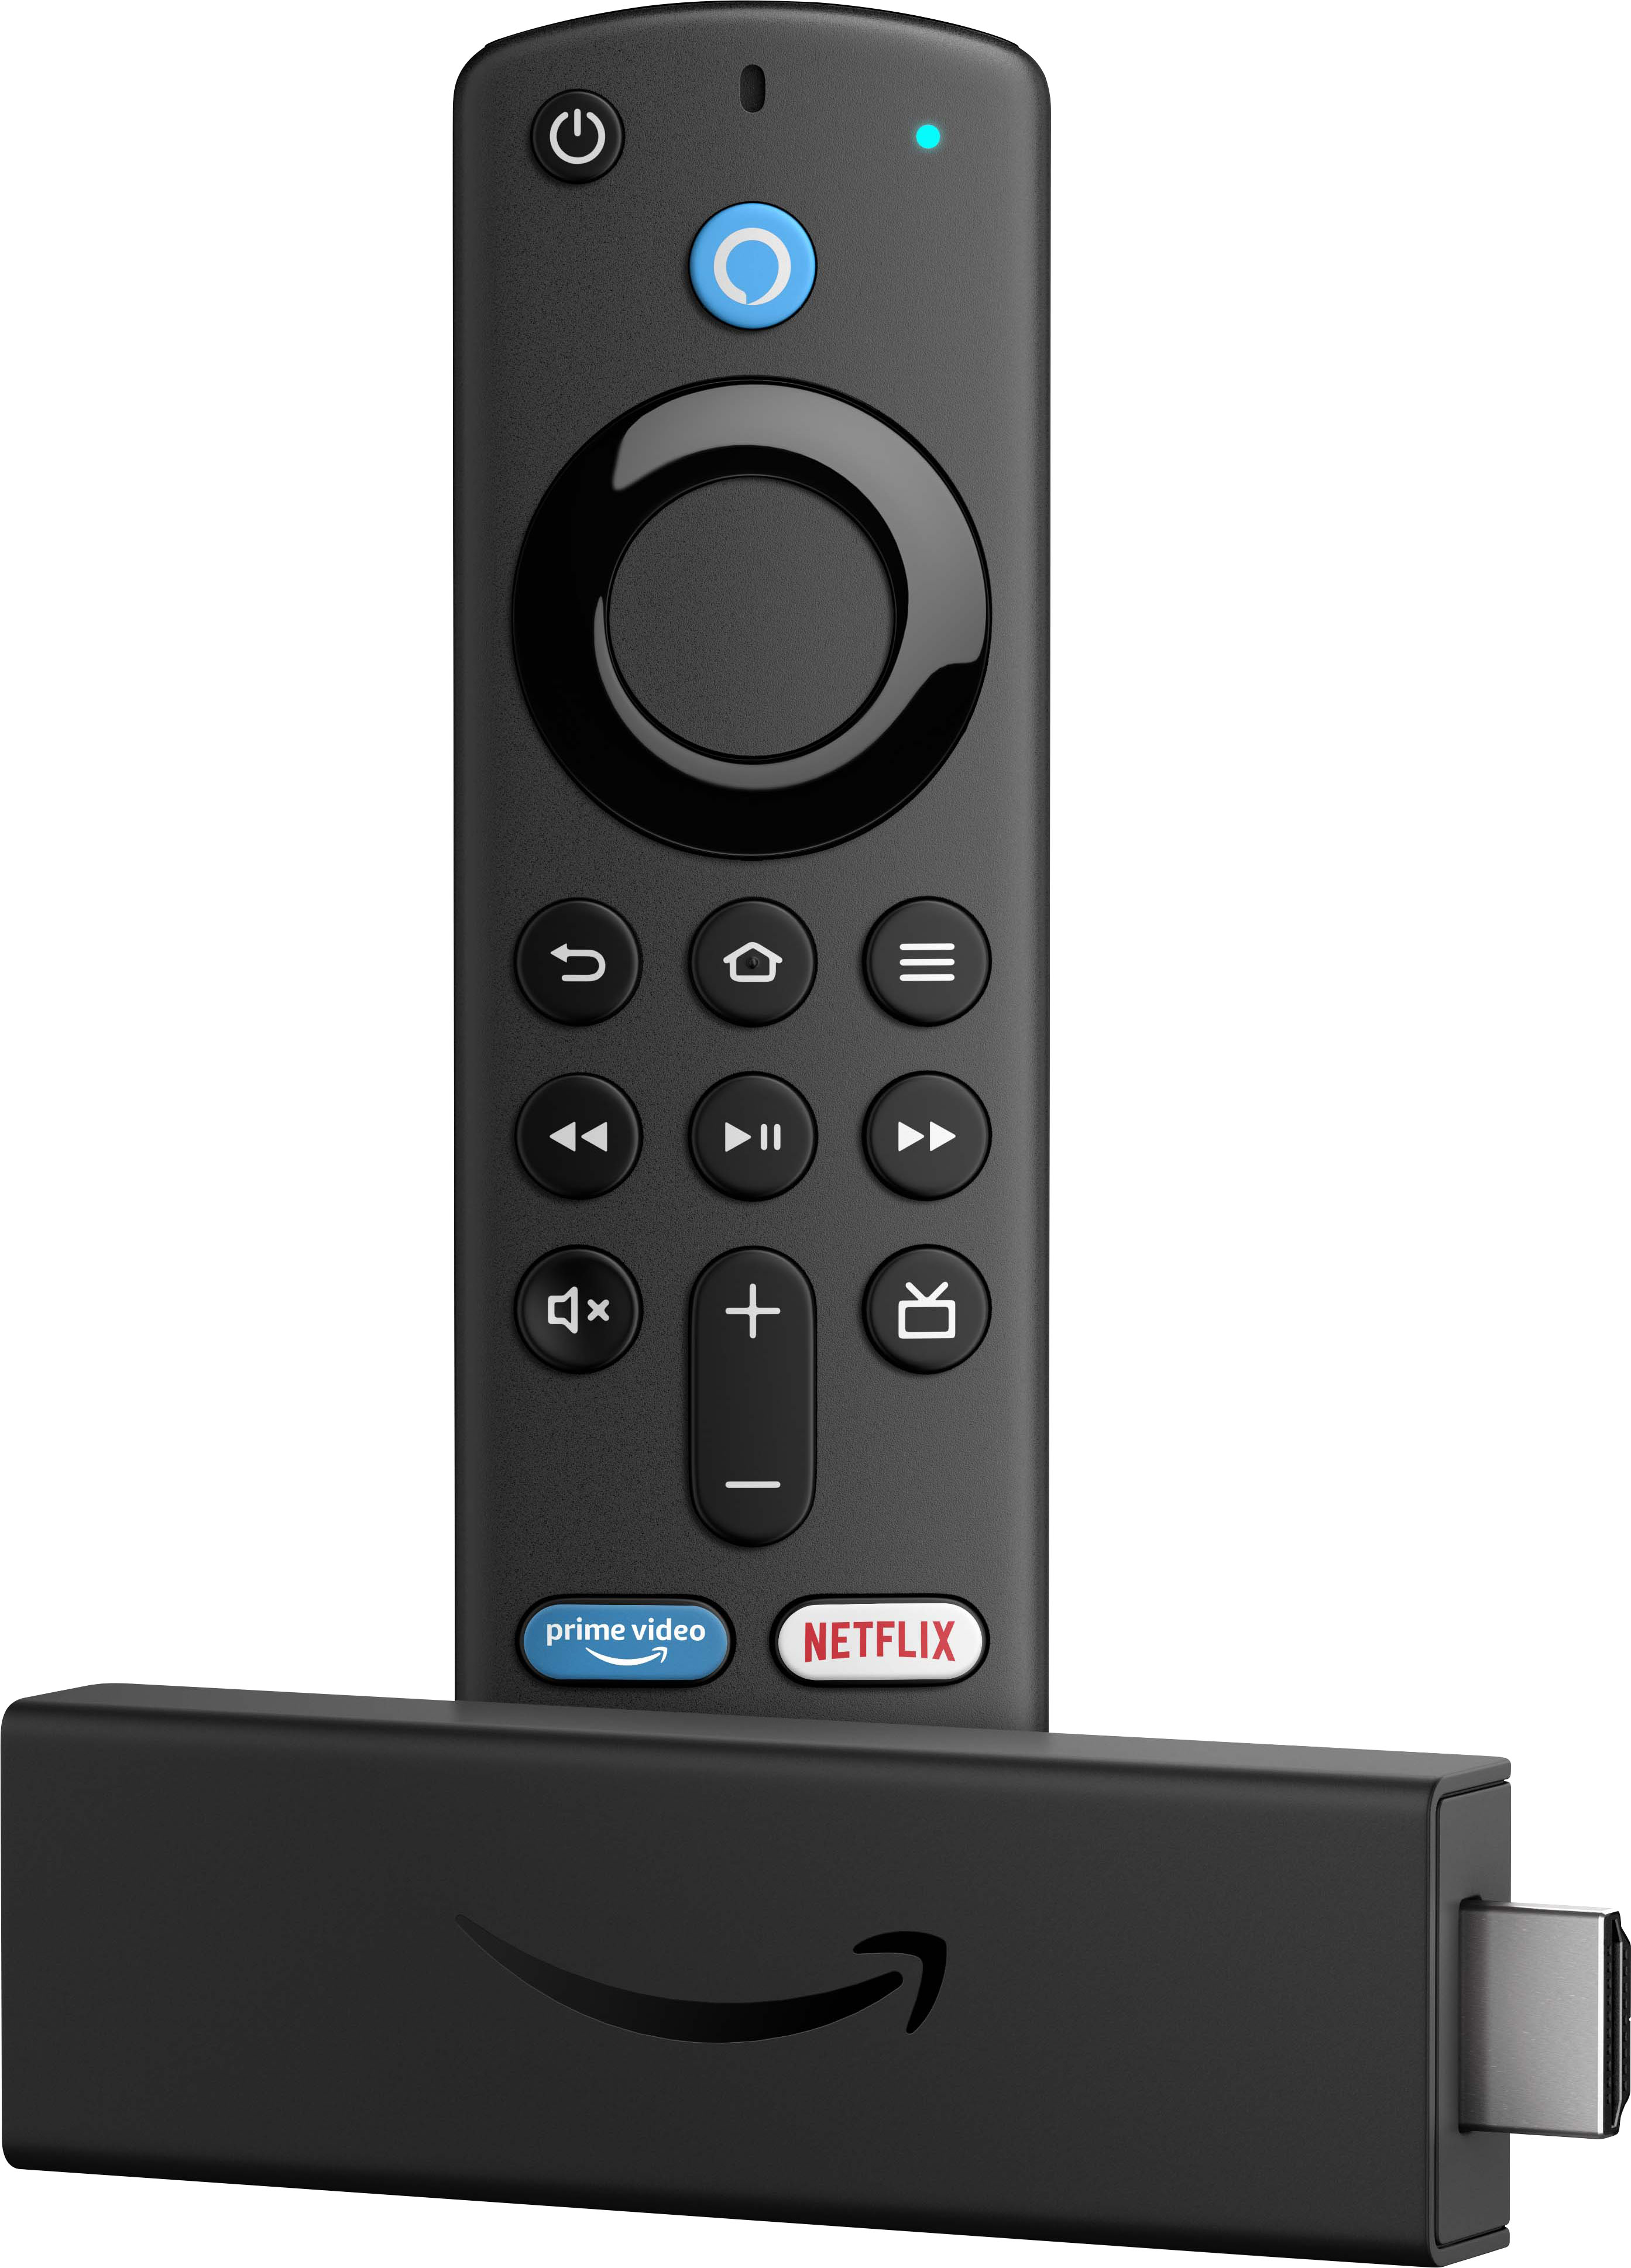 ned Skygge letvægt Amazon Fire TV Stick 4K with Alexa Voice Remote, Dolby Vision, HD Streaming  Media Player (includes TV controls) Black B08XVYZ1Y5 - Best Buy